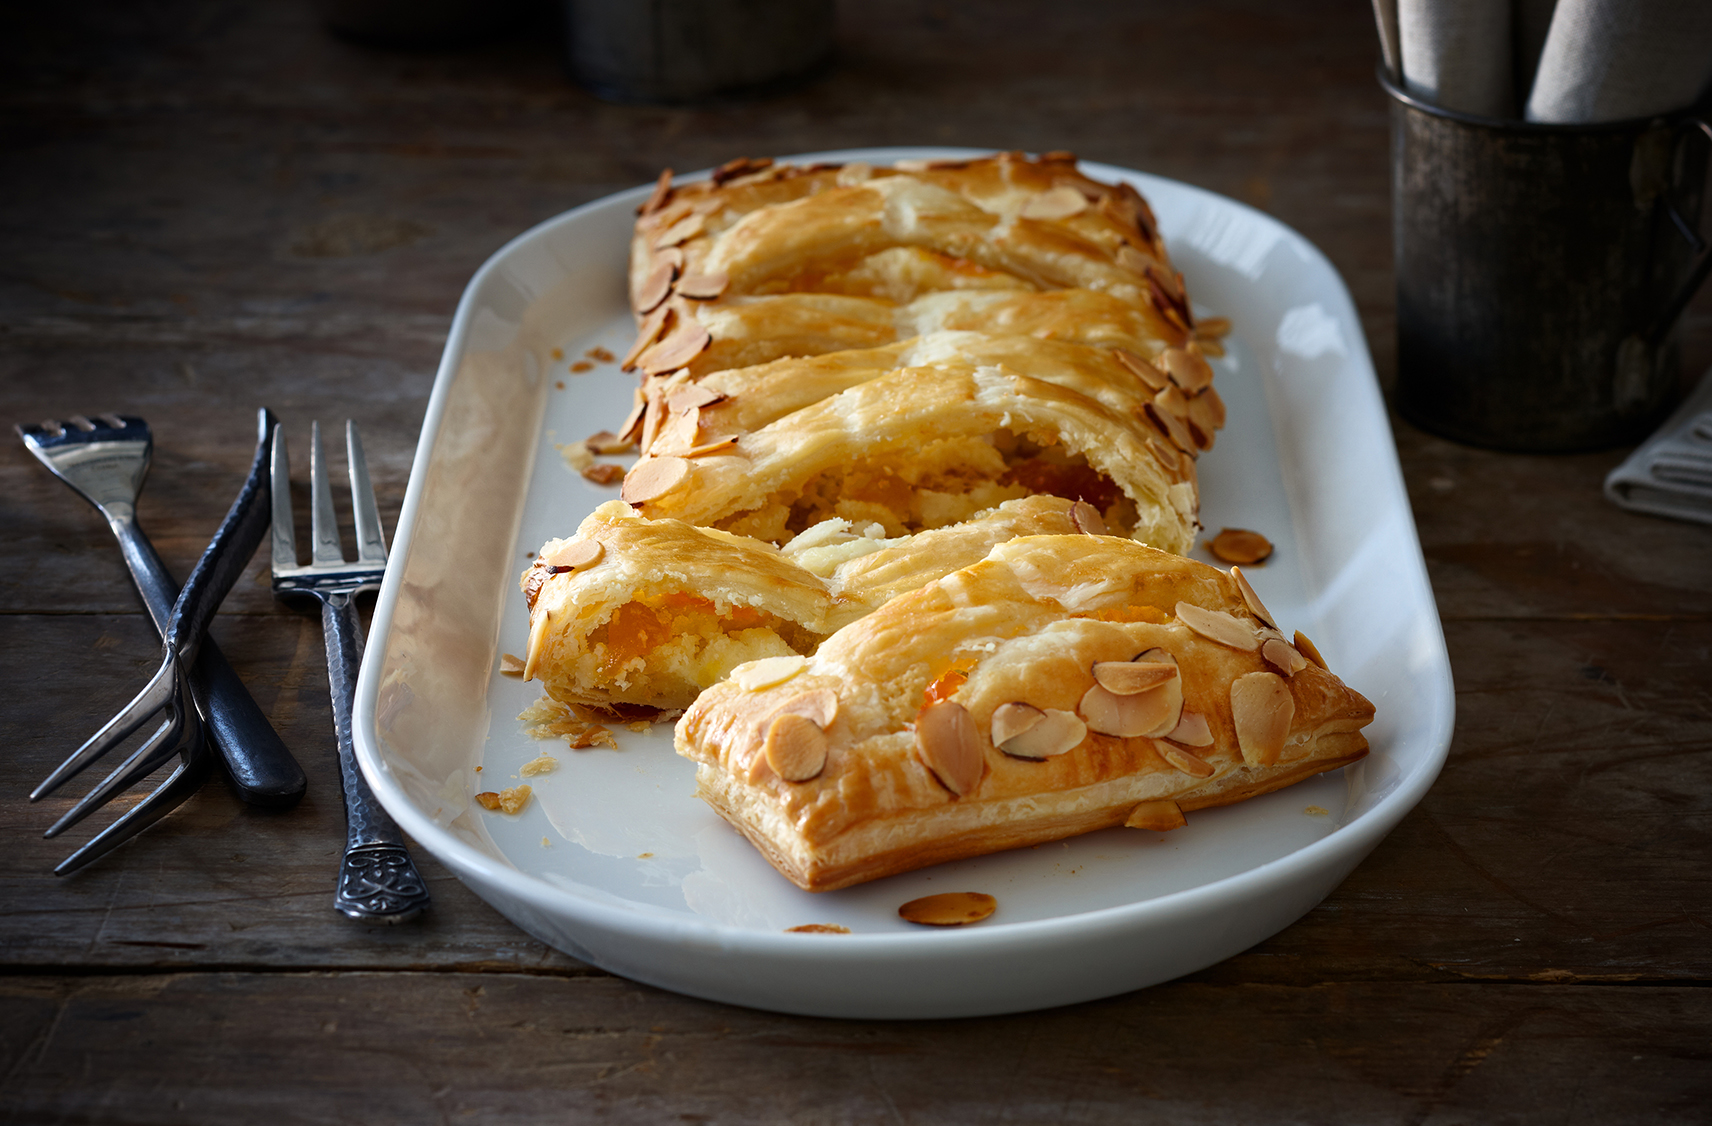 A whole peach and almond Jalousie cut into slices on a platter